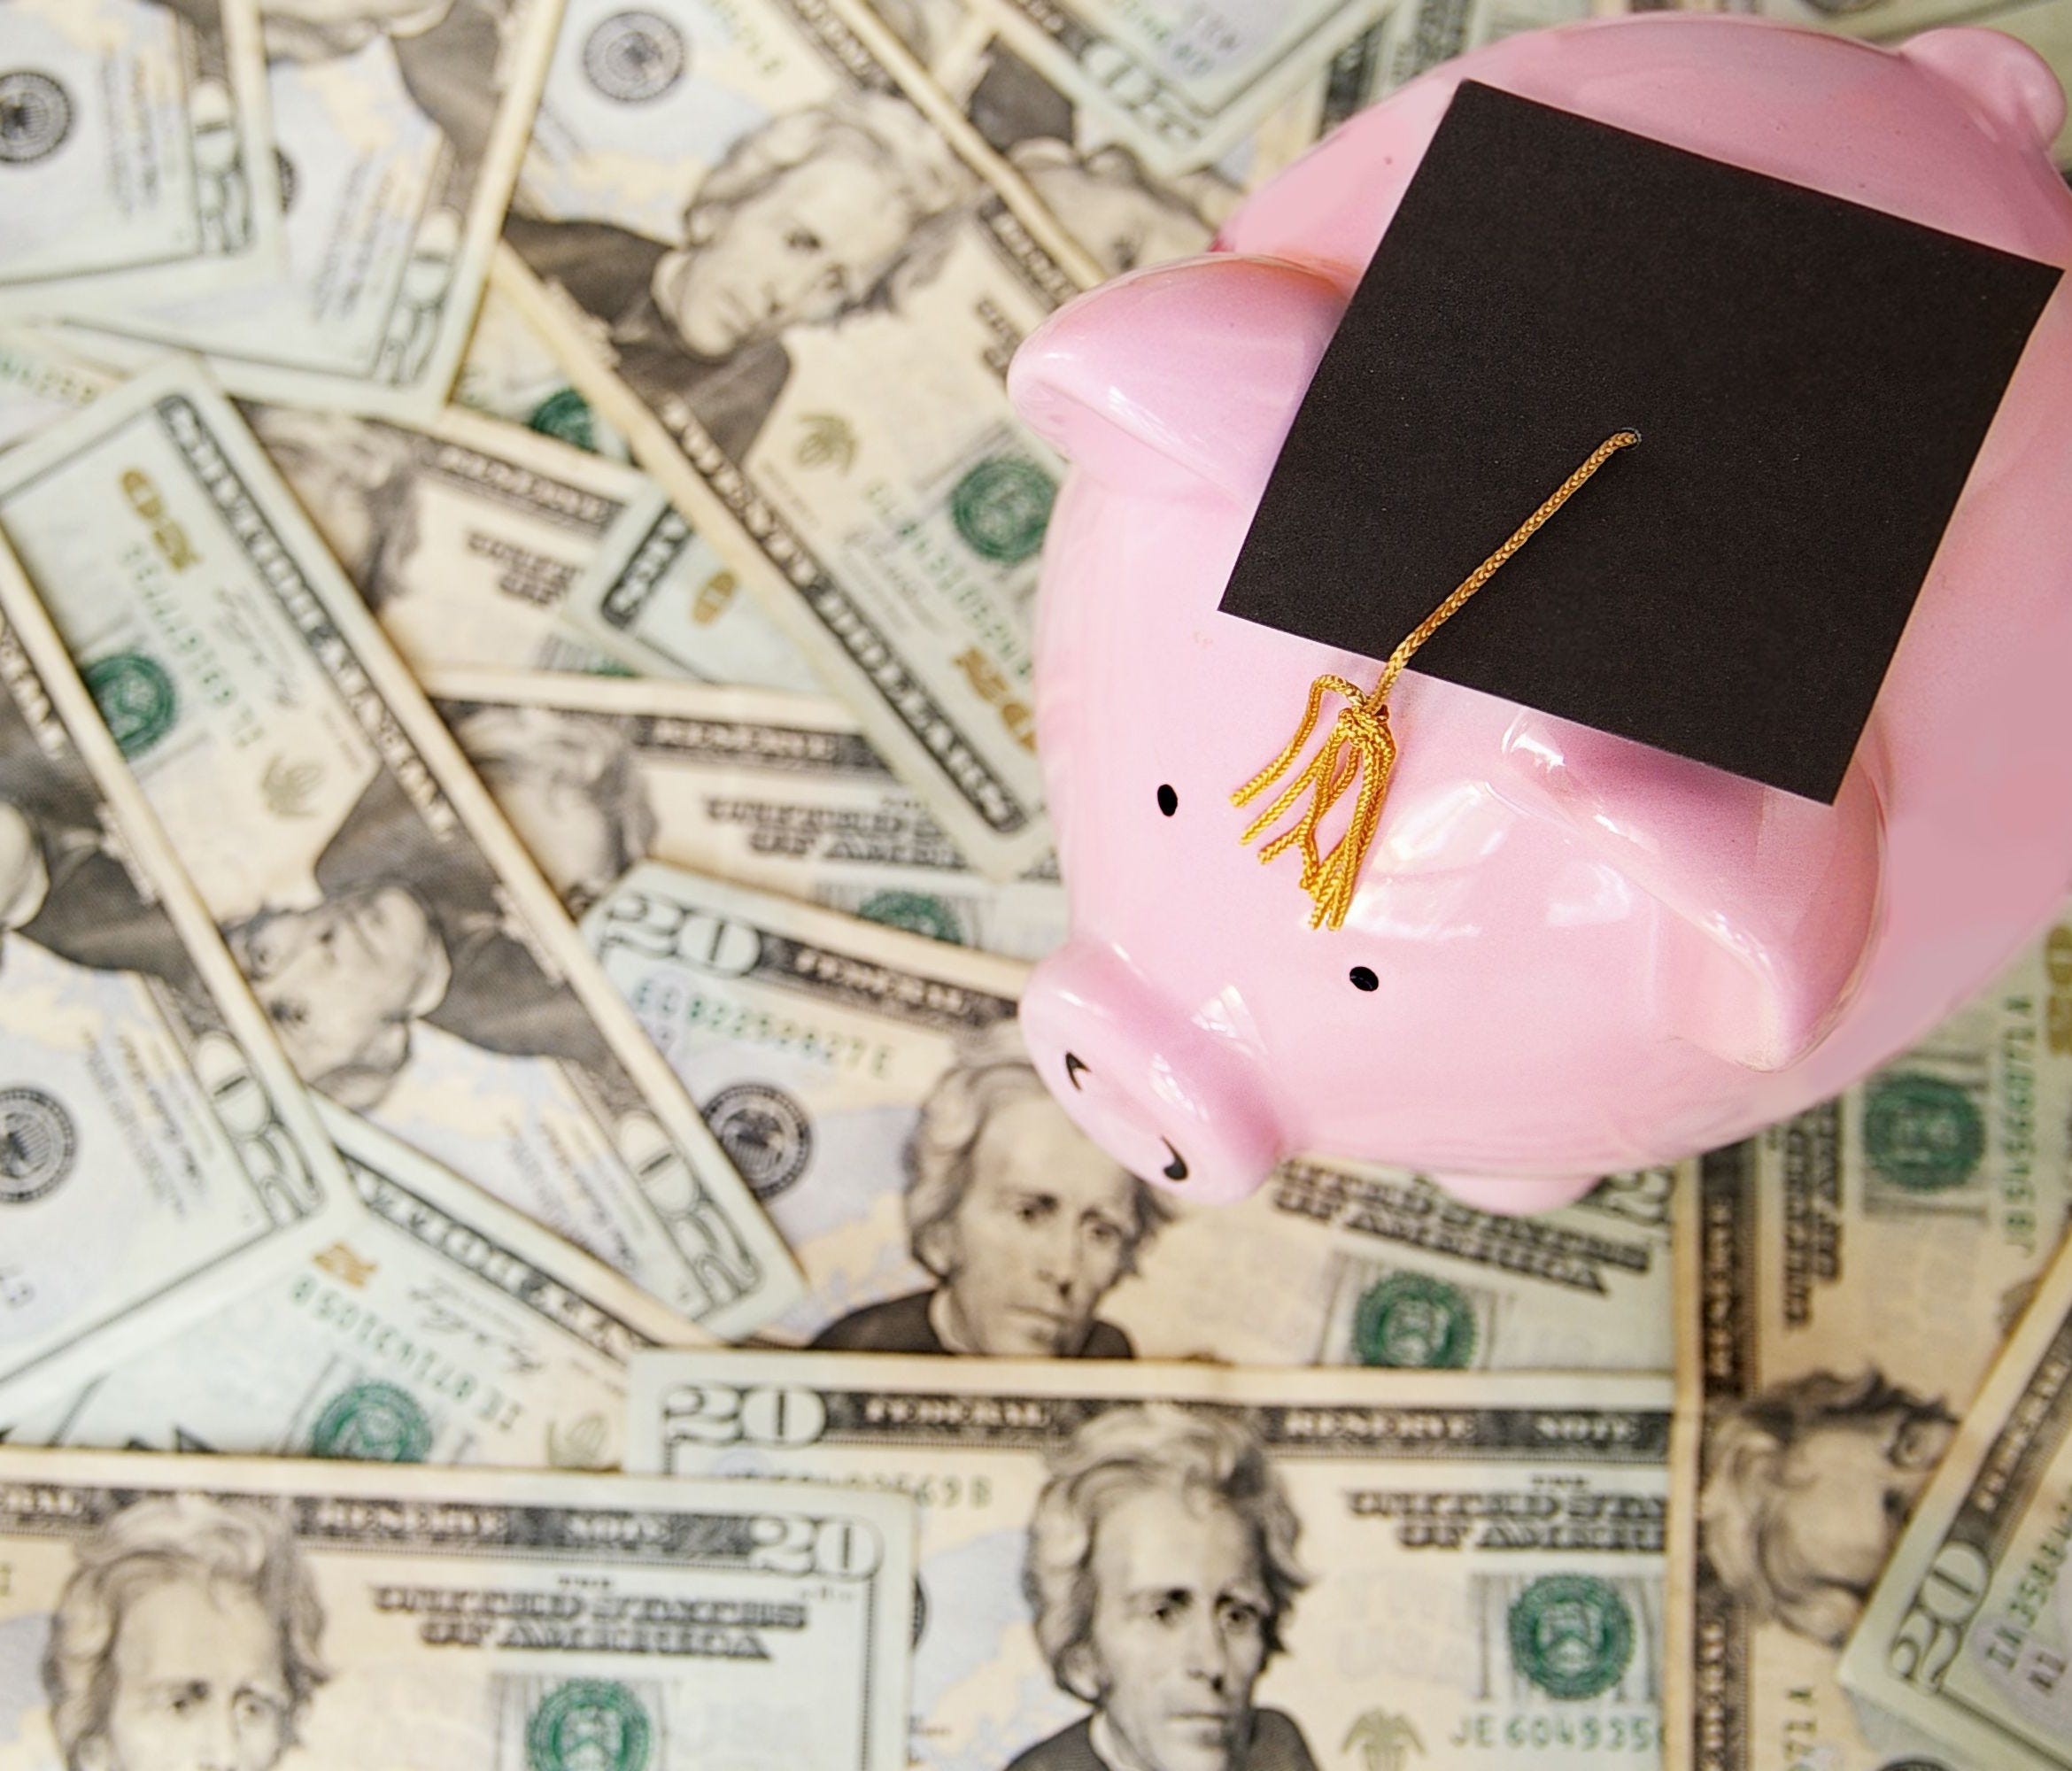 Here's how graduates should go about creating a sound financial plan, according to experts.